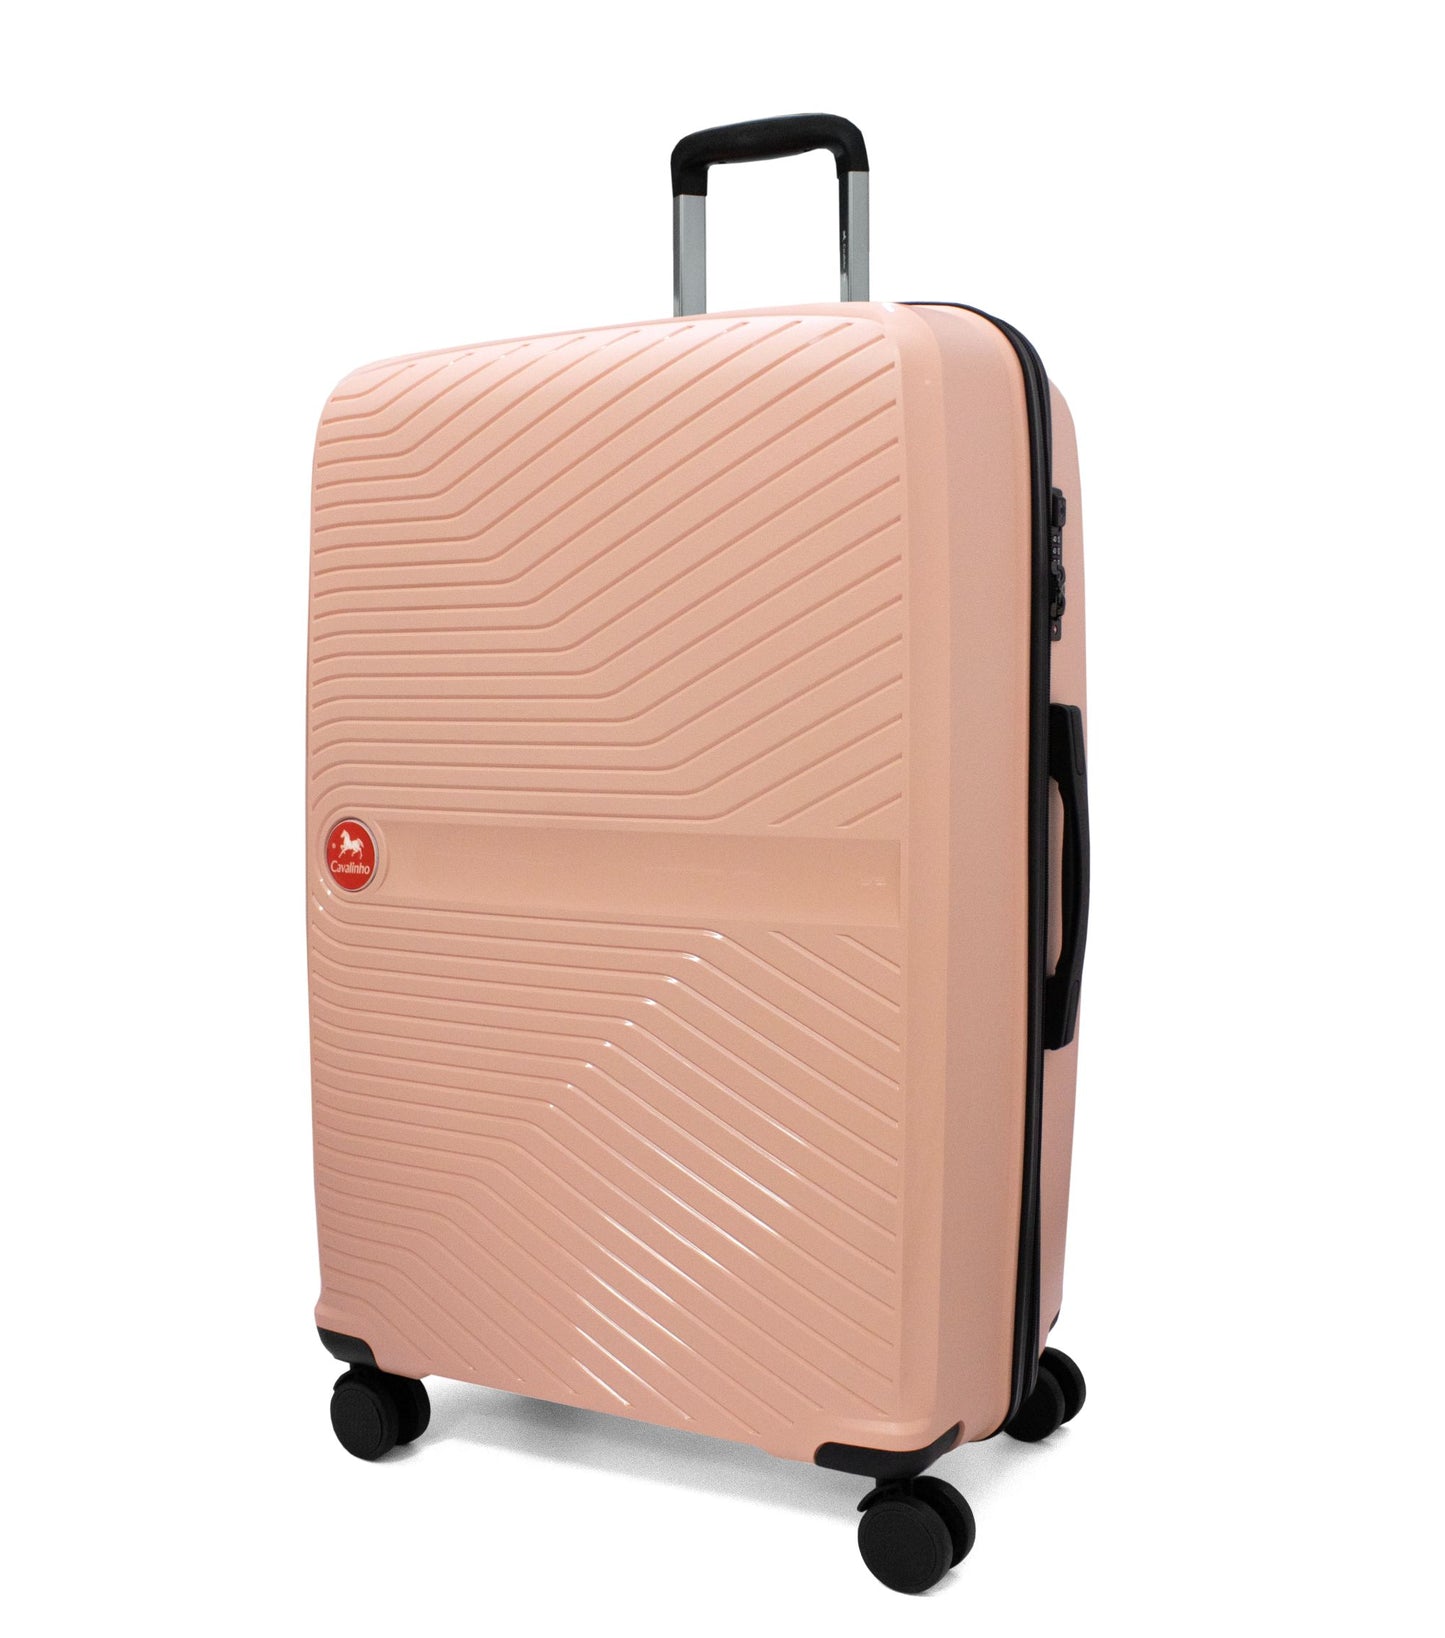 Cavalinho Colorful Check-in Hardside Luggage (28") - 28 inch Salmon - 68020004.11.28_2